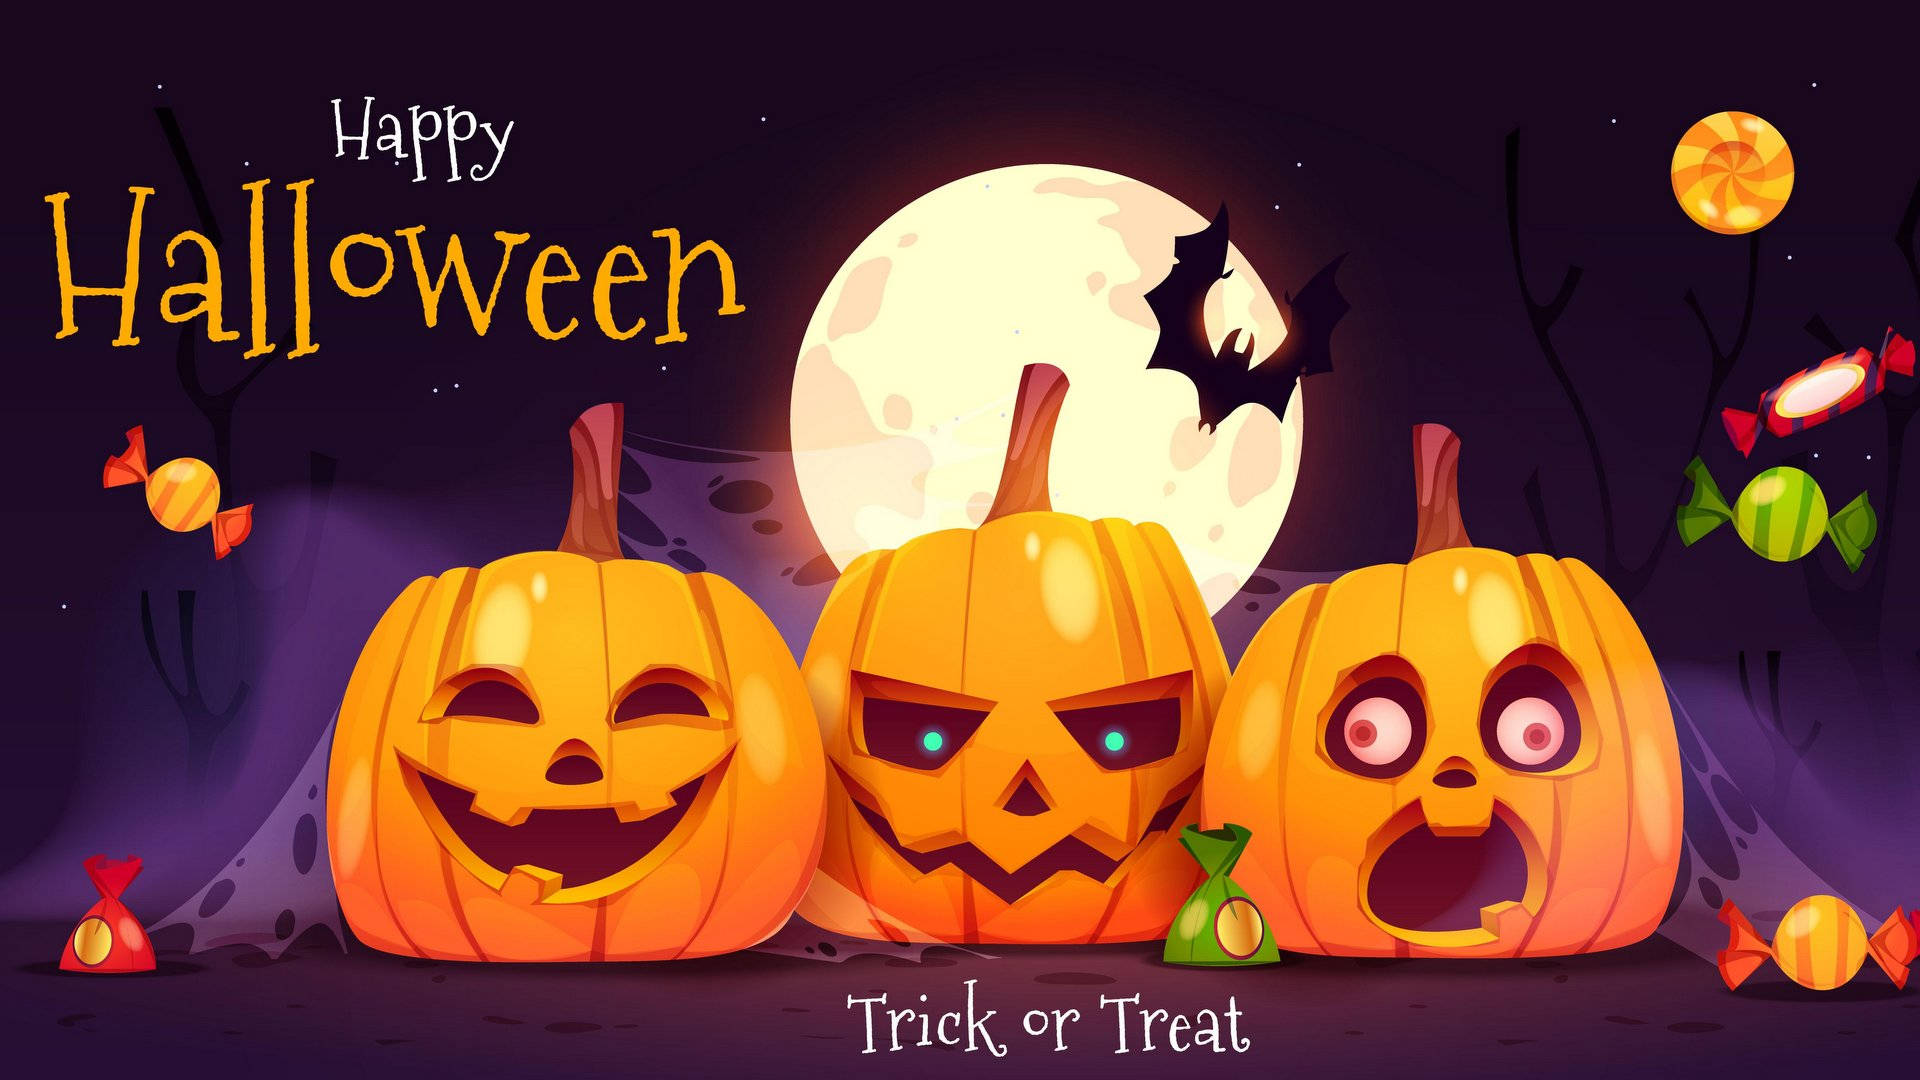 Get Ready To Trick Or Treat This Halloween!